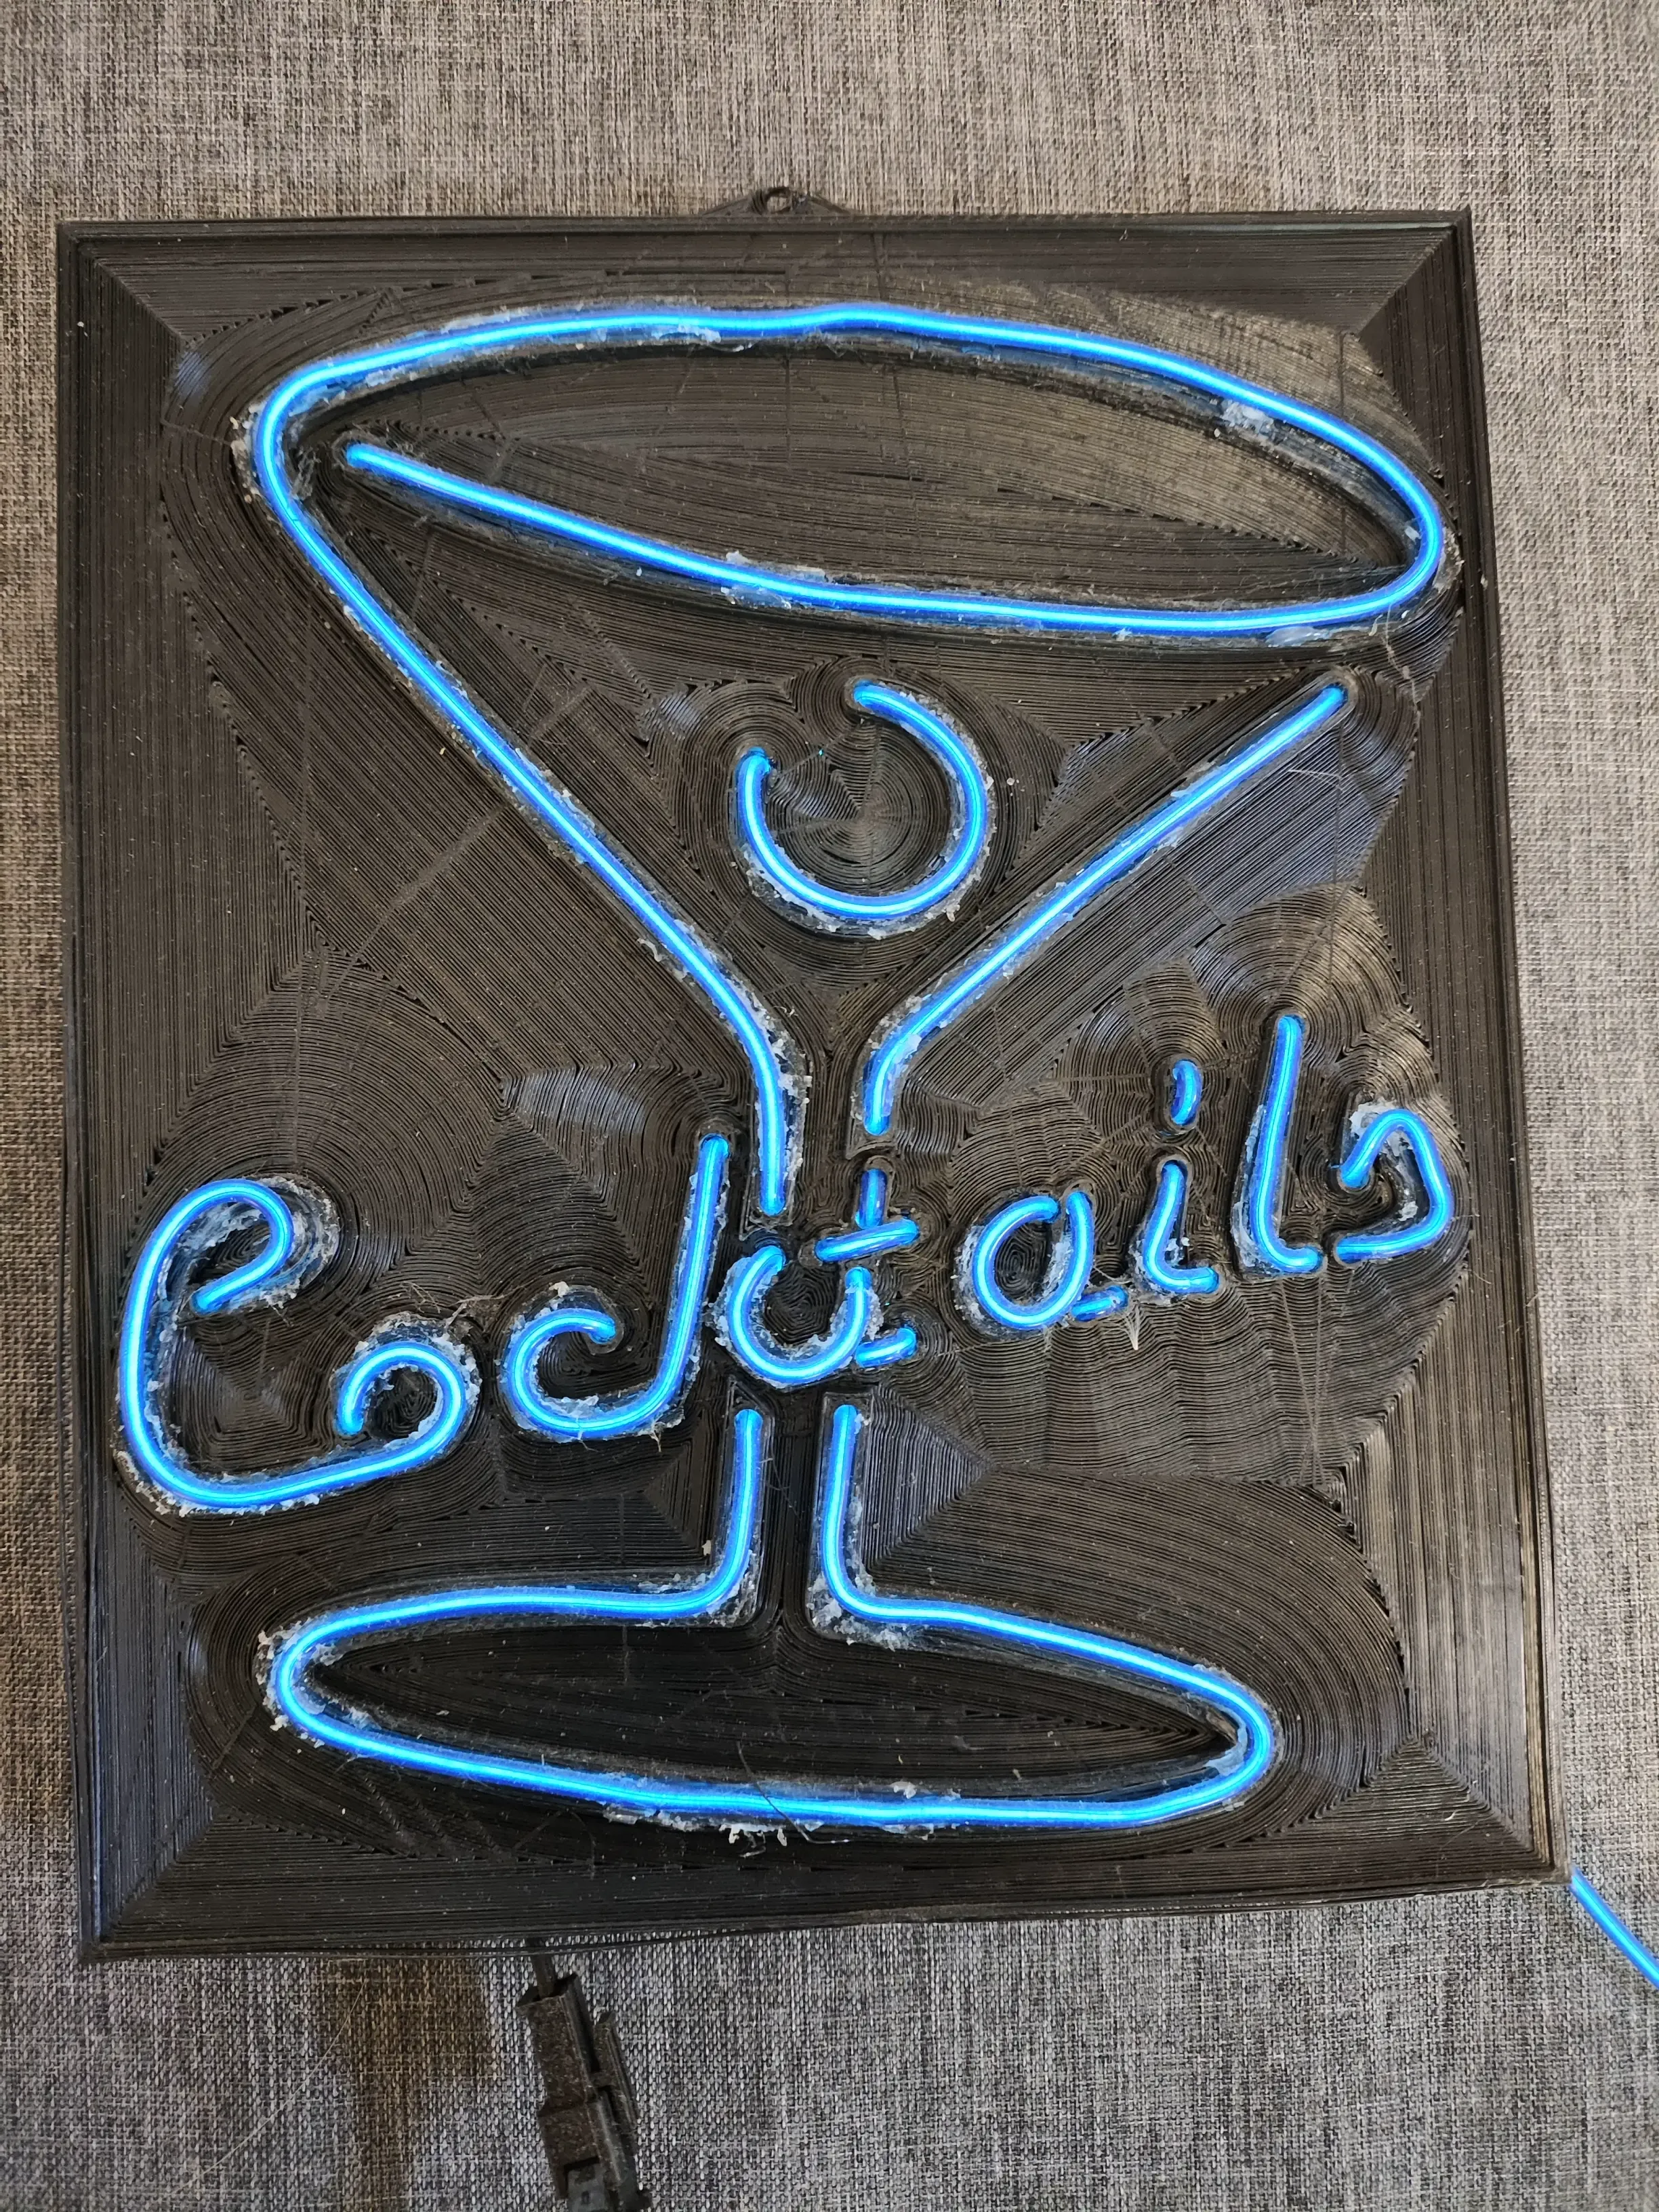 Neon-Like Retro Illumination: Cocktails Sign with EL Wire